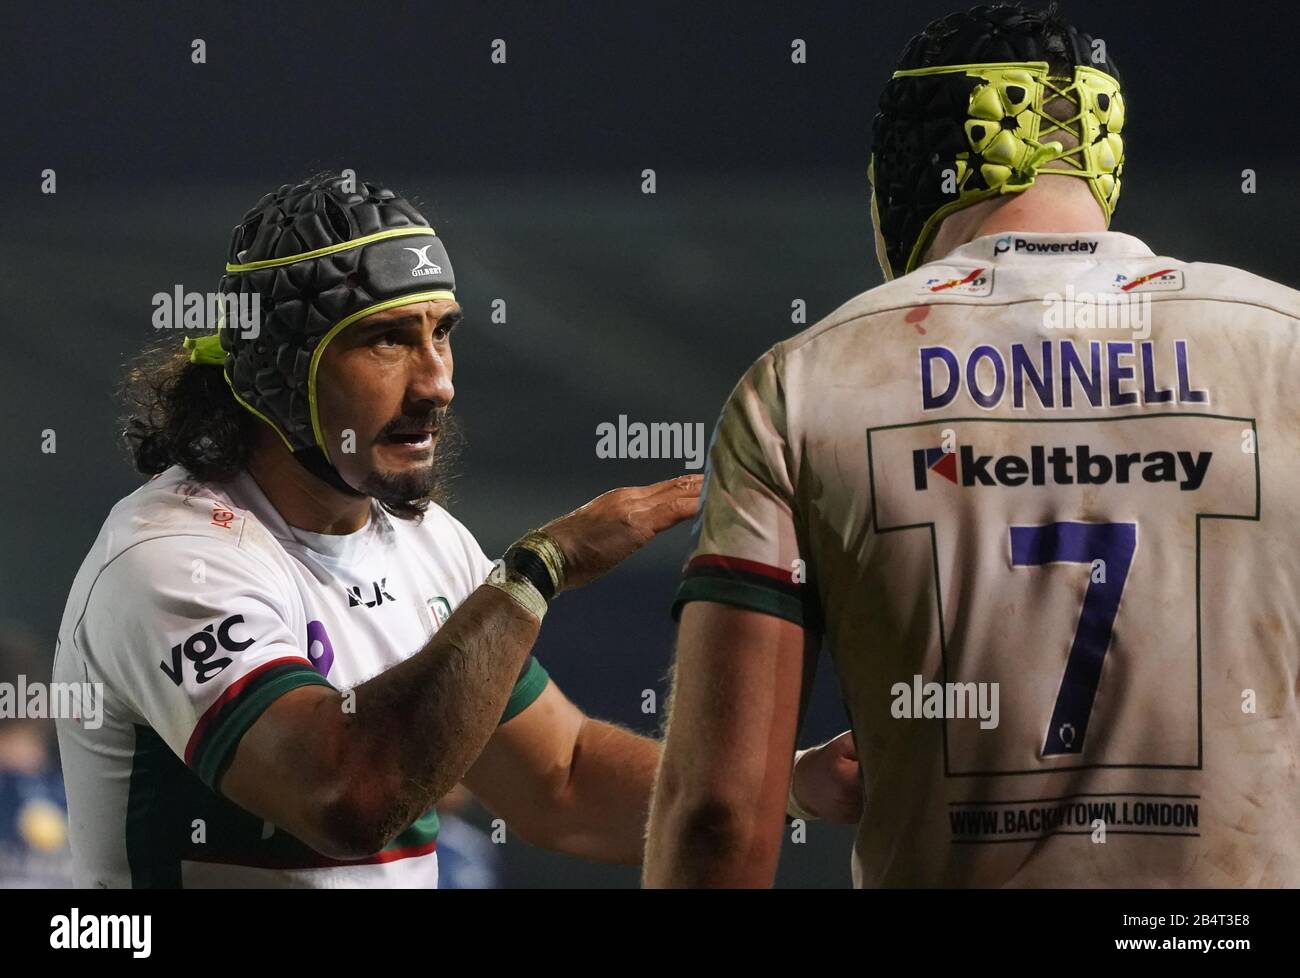 London Irishs Blair Cowan gives instructions to London Irish flanker Ben Donnell during a Gallagher Premiership Rugby Union match won by Sharks 39-0, Friday, Mar